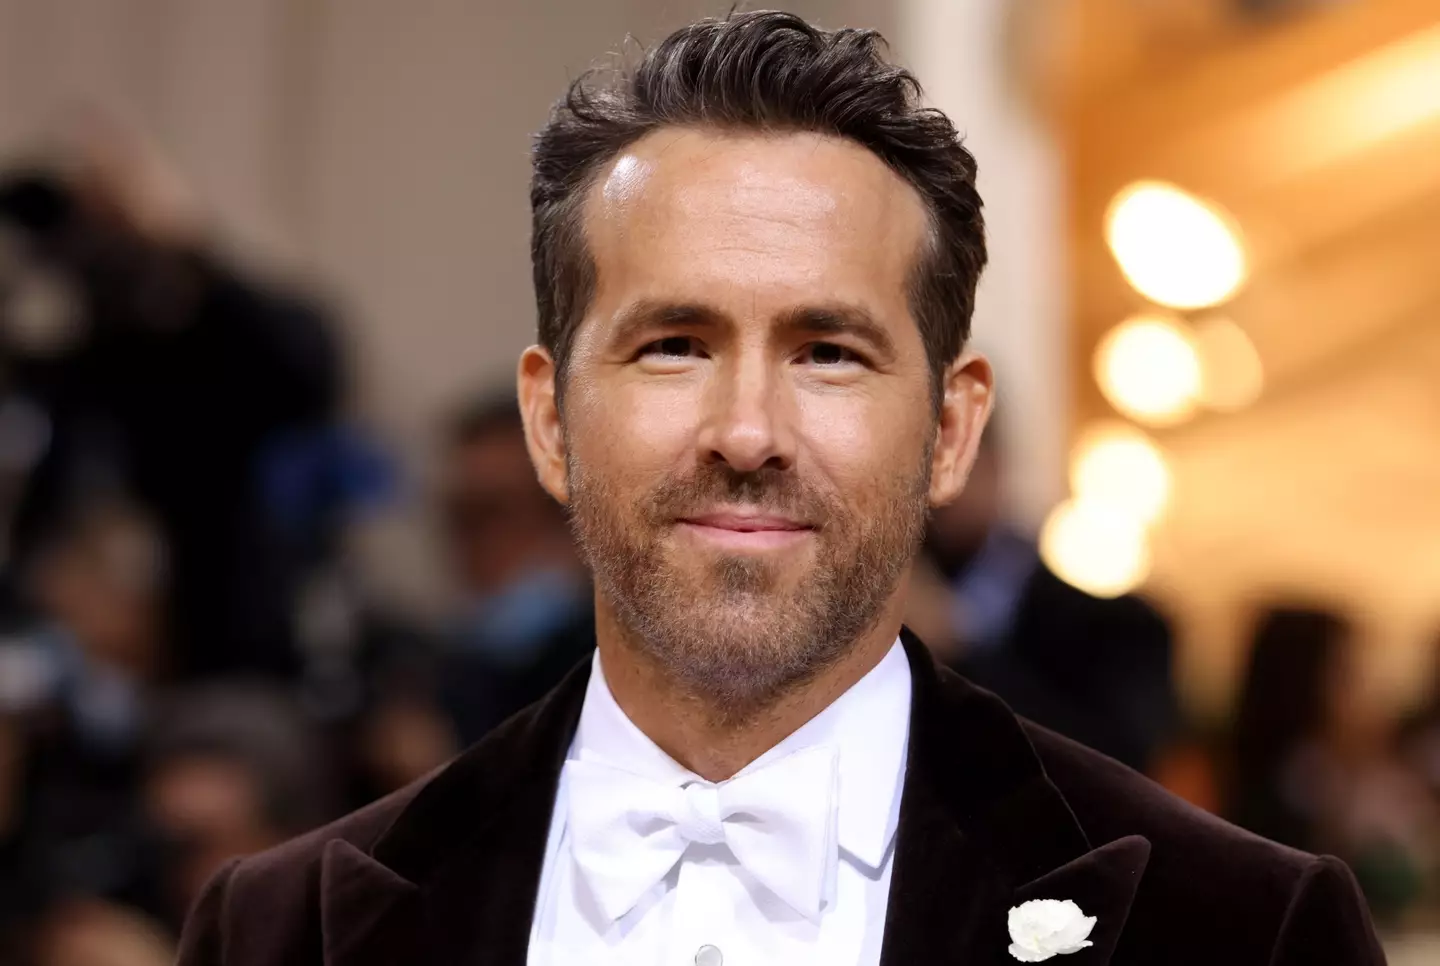 Ryan Reynolds has also been suggested for a role in the Gears of War movie.